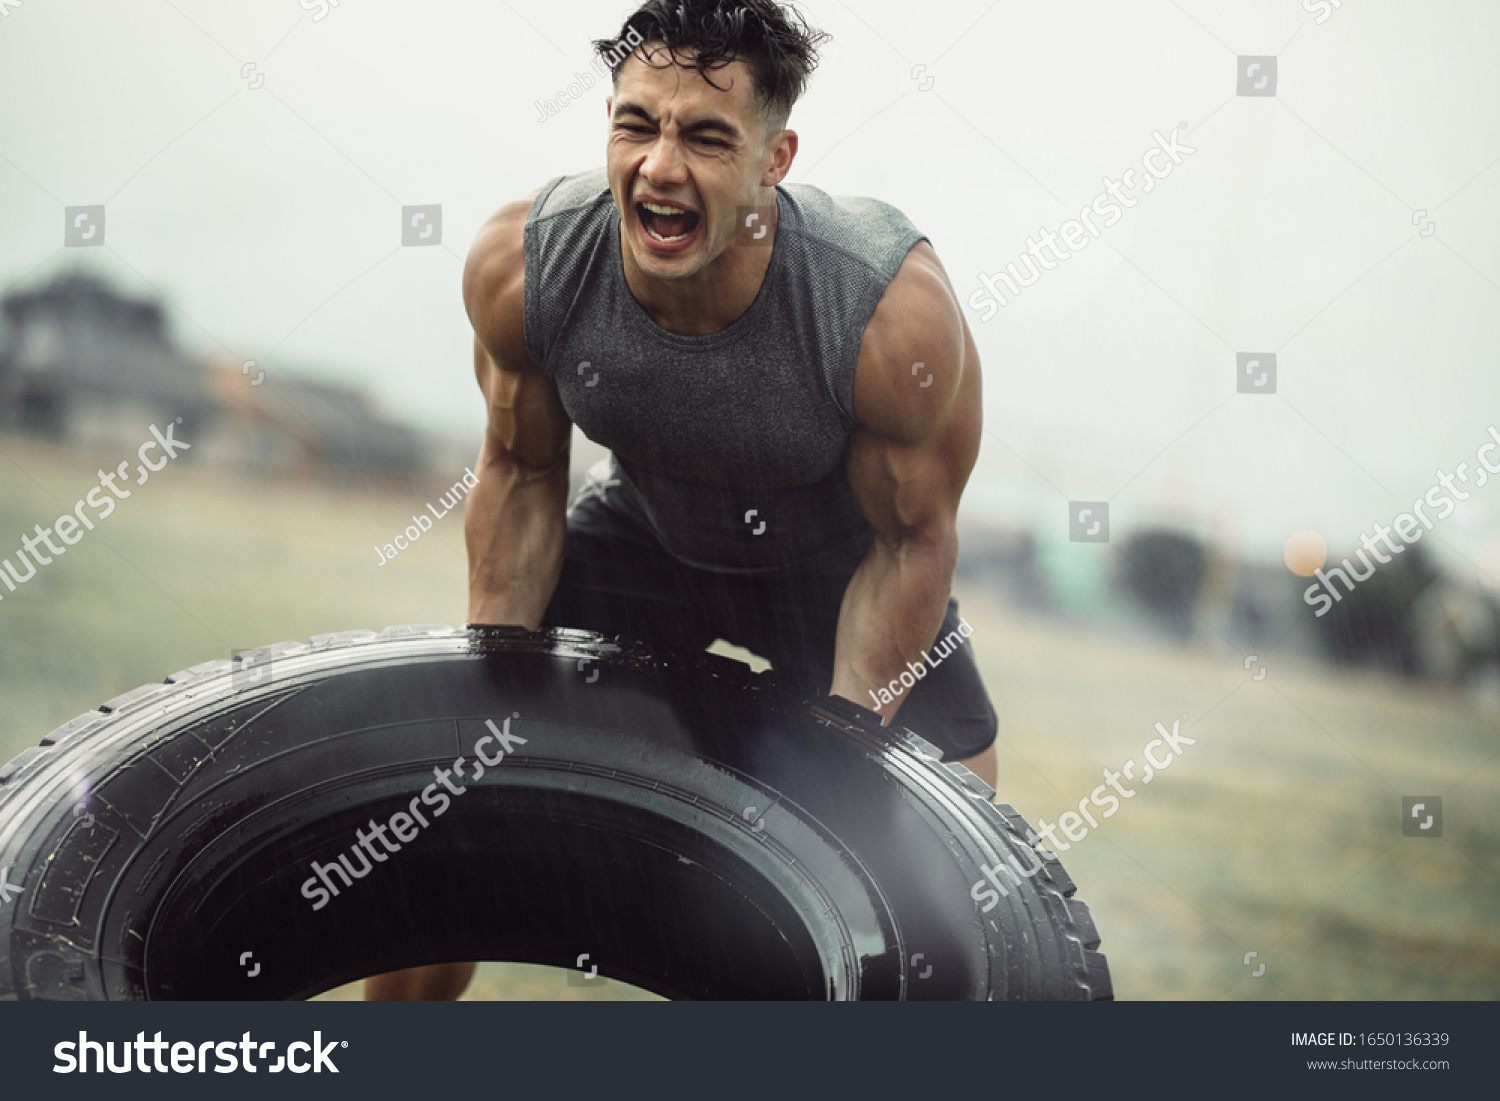 Tough young male athlete doing a tire flip exercise in the rain. Muscular man doing cross training outdoors on field. #1650136339